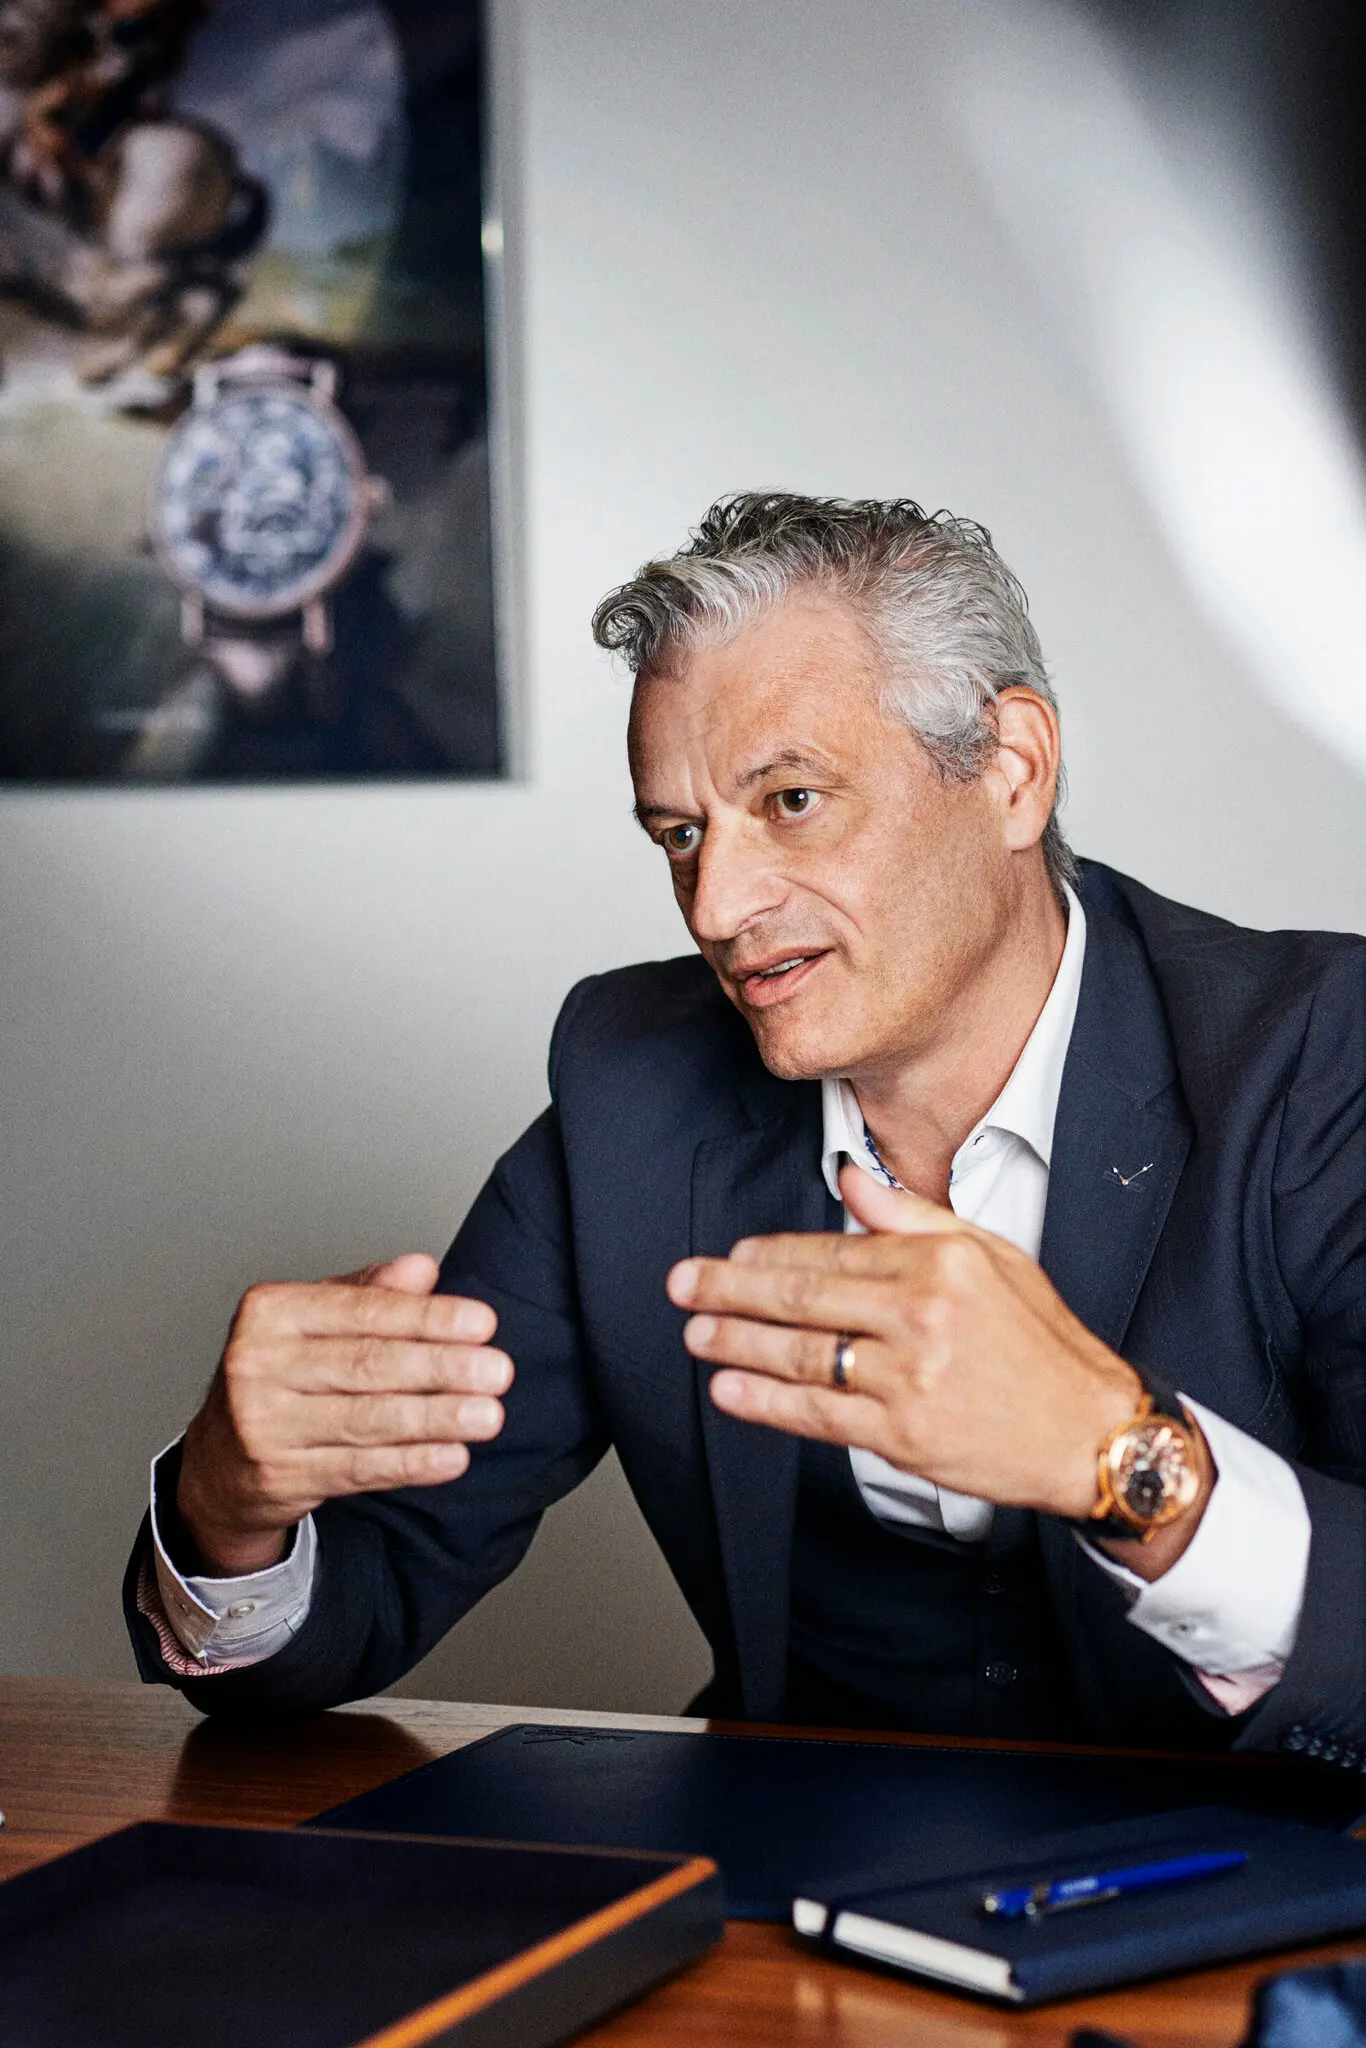 At Breguet, the Focus Is on the Watch